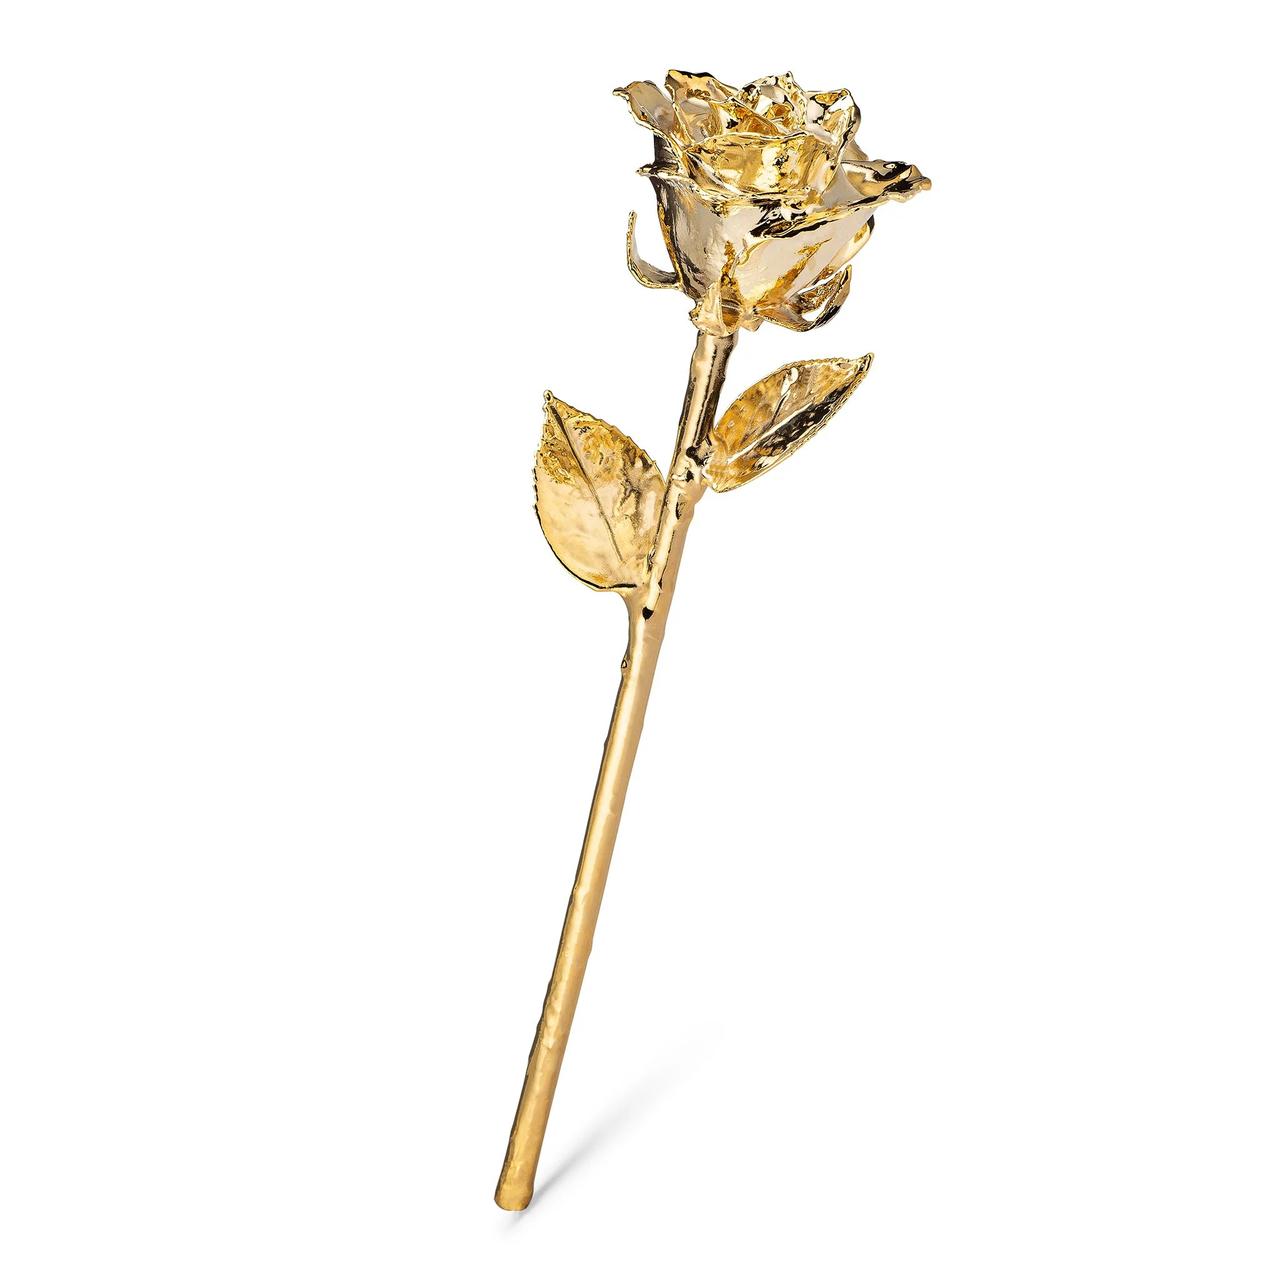 Gold-dipped rose romantic one-year anniversary gift for him or her